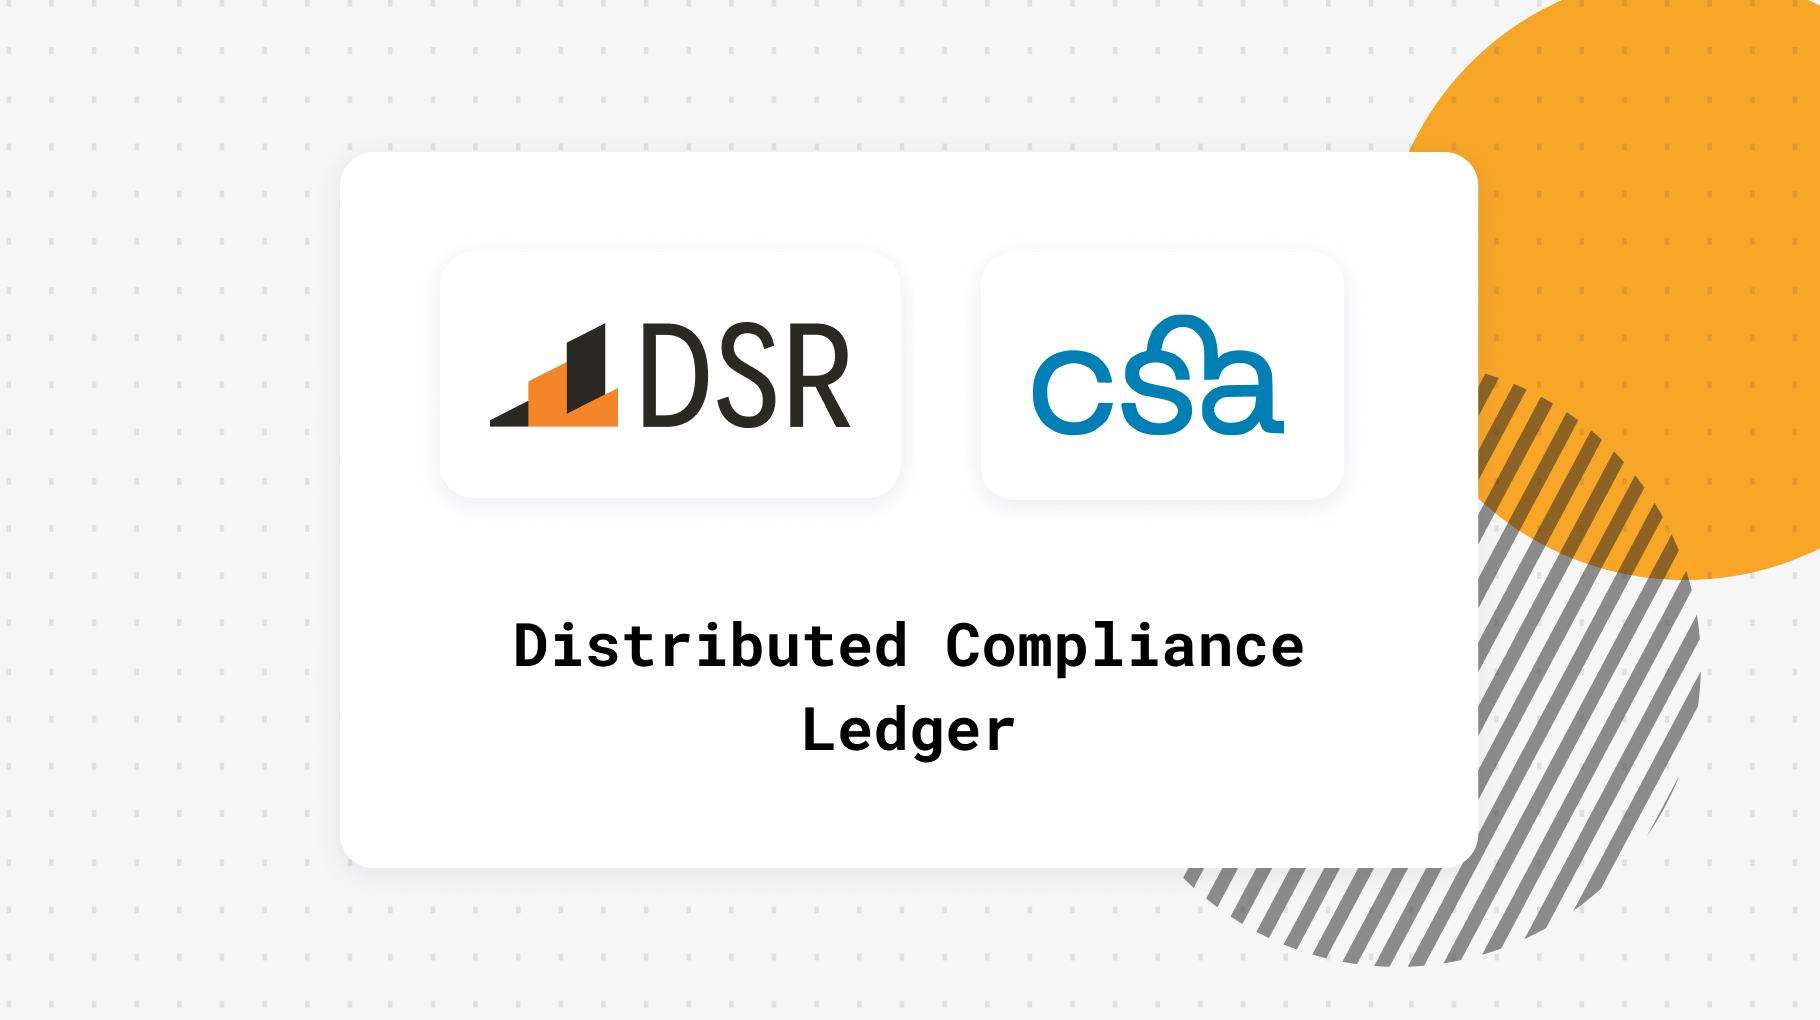 DSR supports the Distributed Compliance Ledger from the CSA